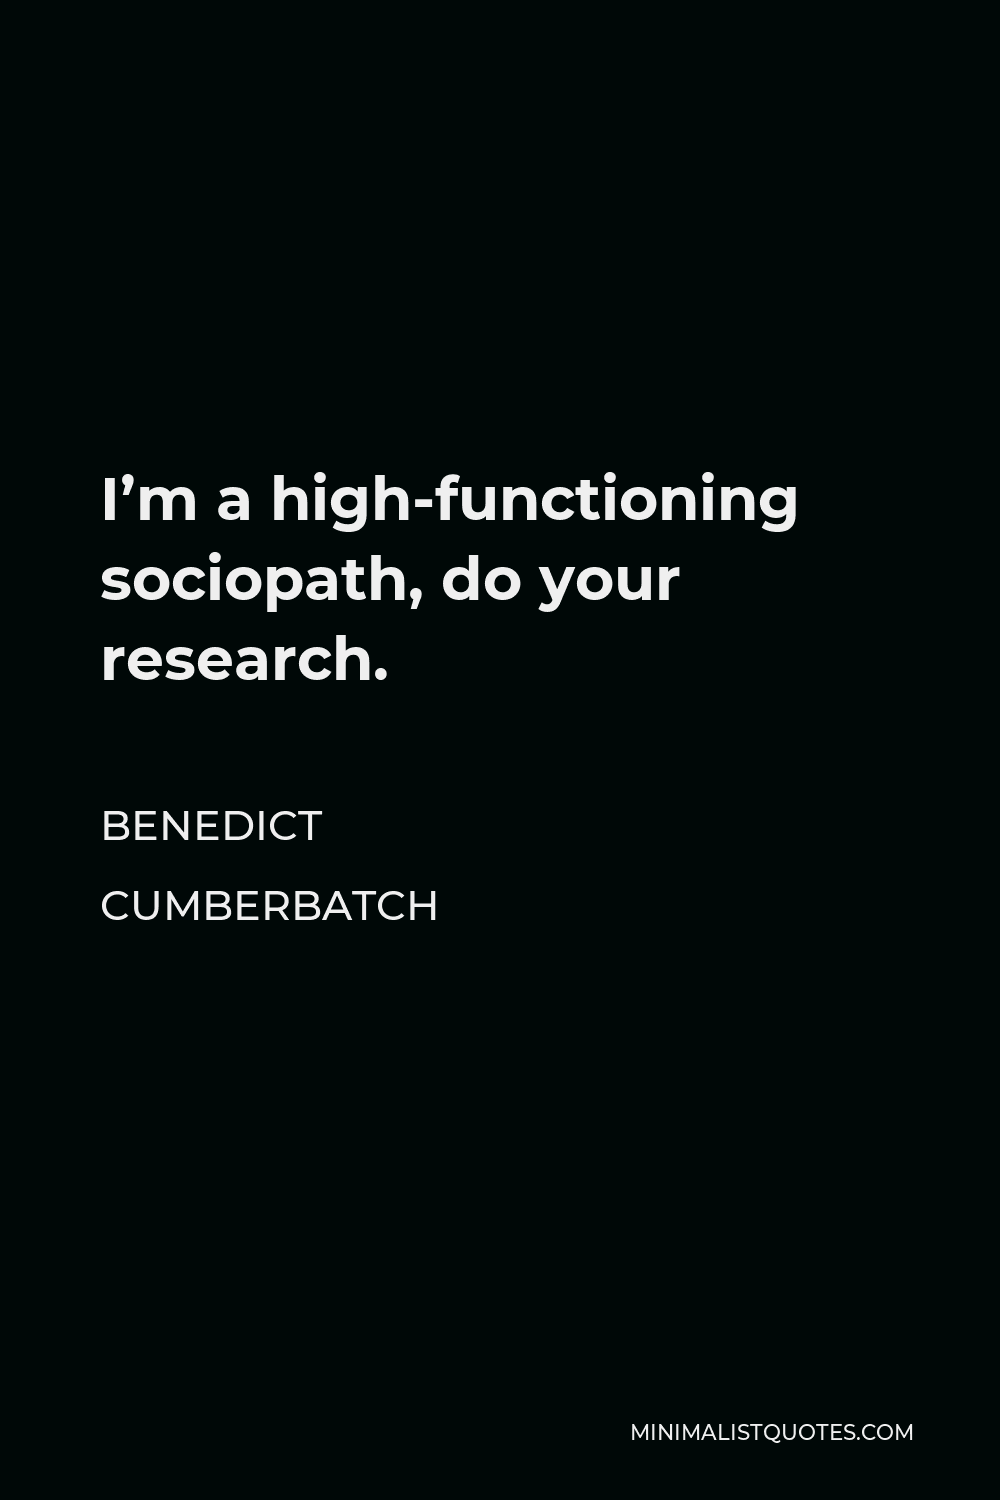 Benedict Cumberbatch Quote - I’m a high-functioning sociopath, do your research.